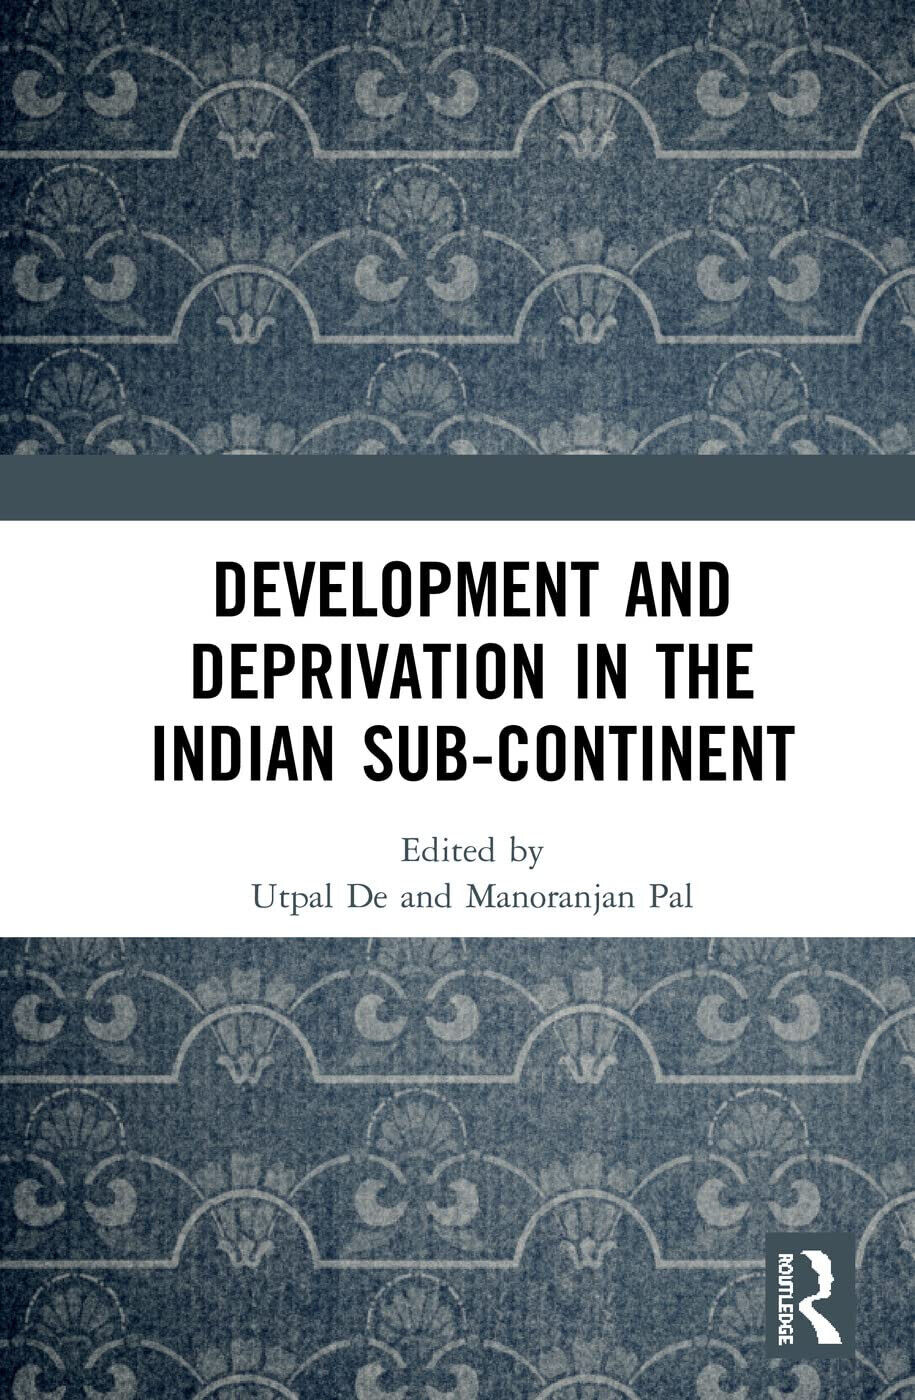 Development and Deprivation in the Indian Sub-continent - Utpal De - 2019 libro usato